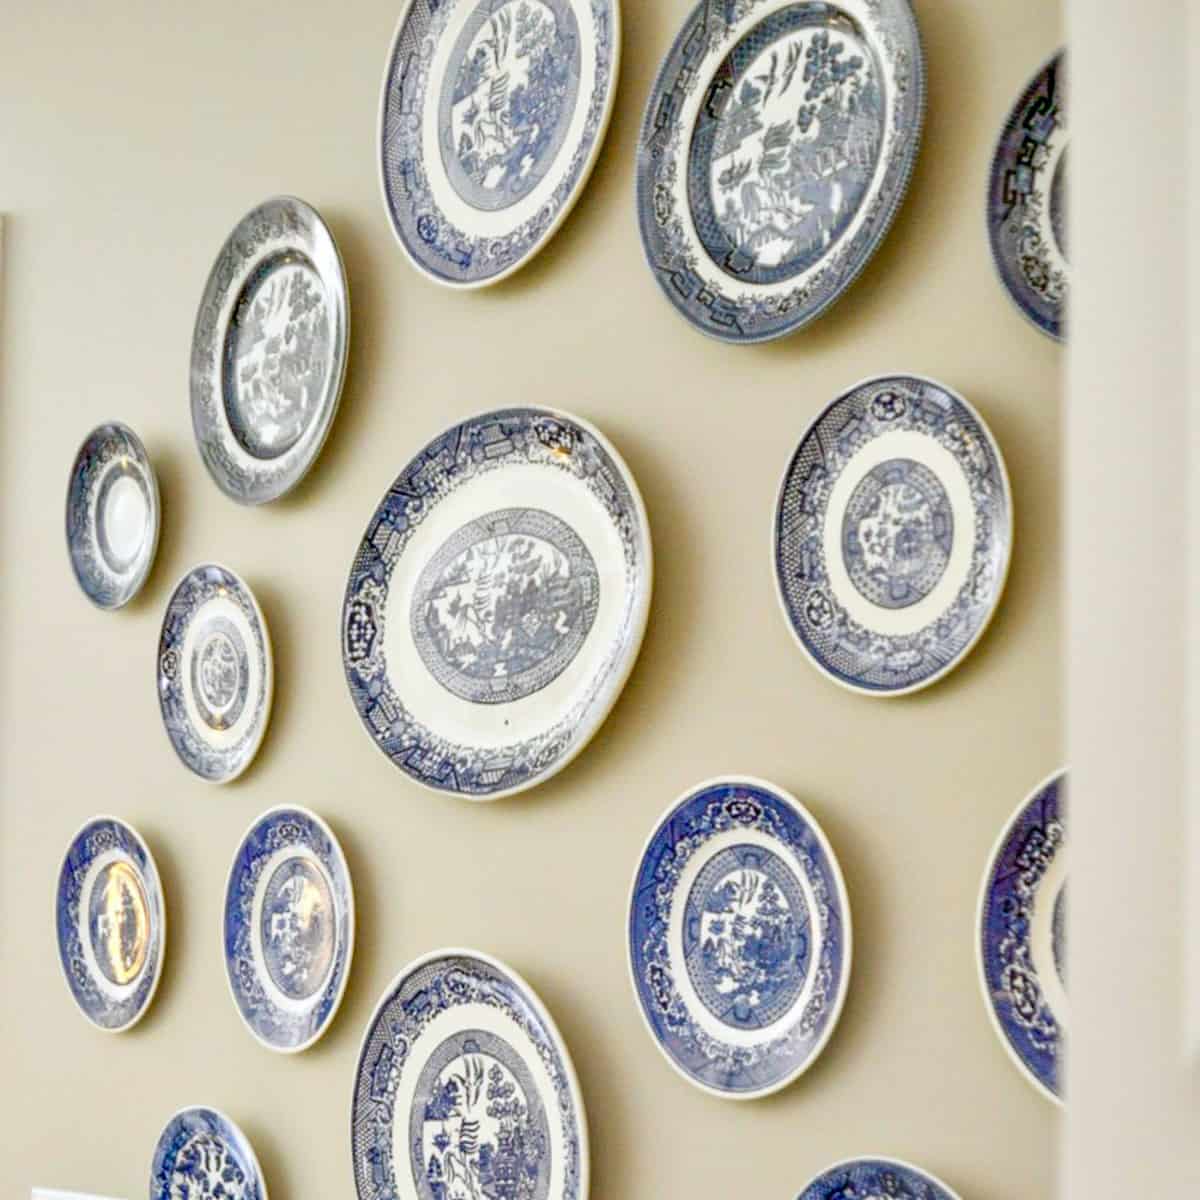 How to Hang Plates & Platters on the Wall - Easy!